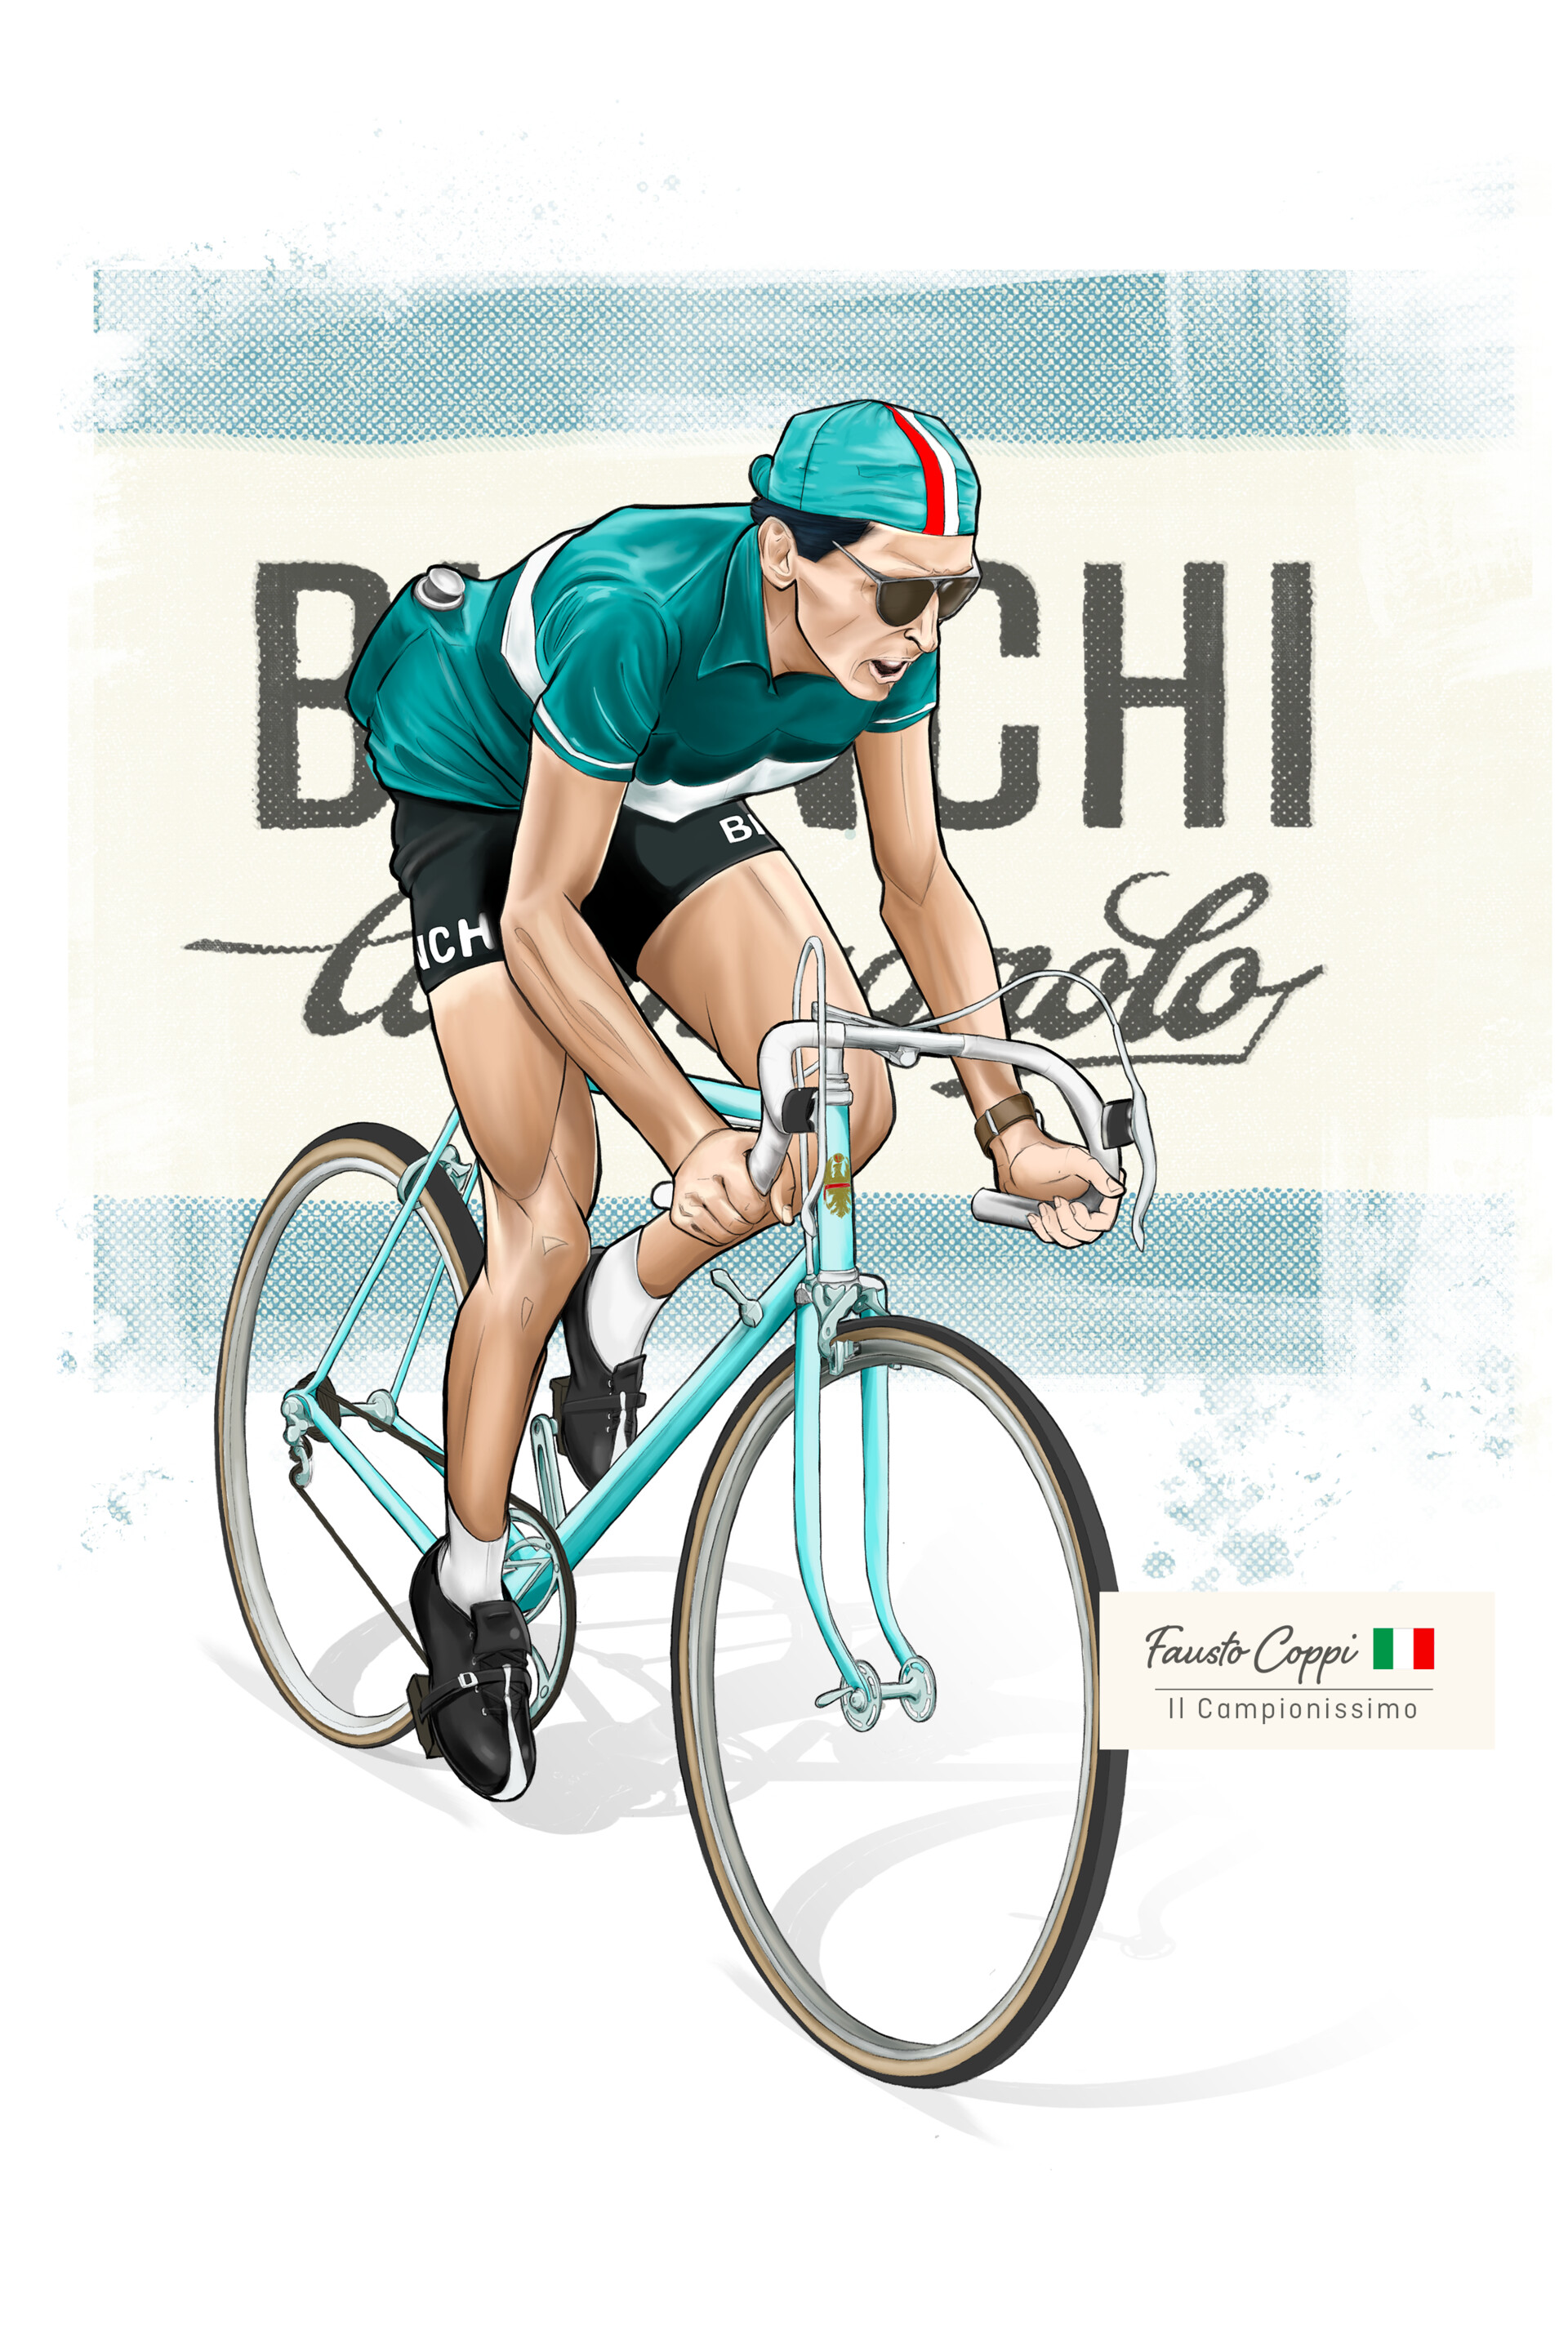 - Coppi Pin-Up style poster